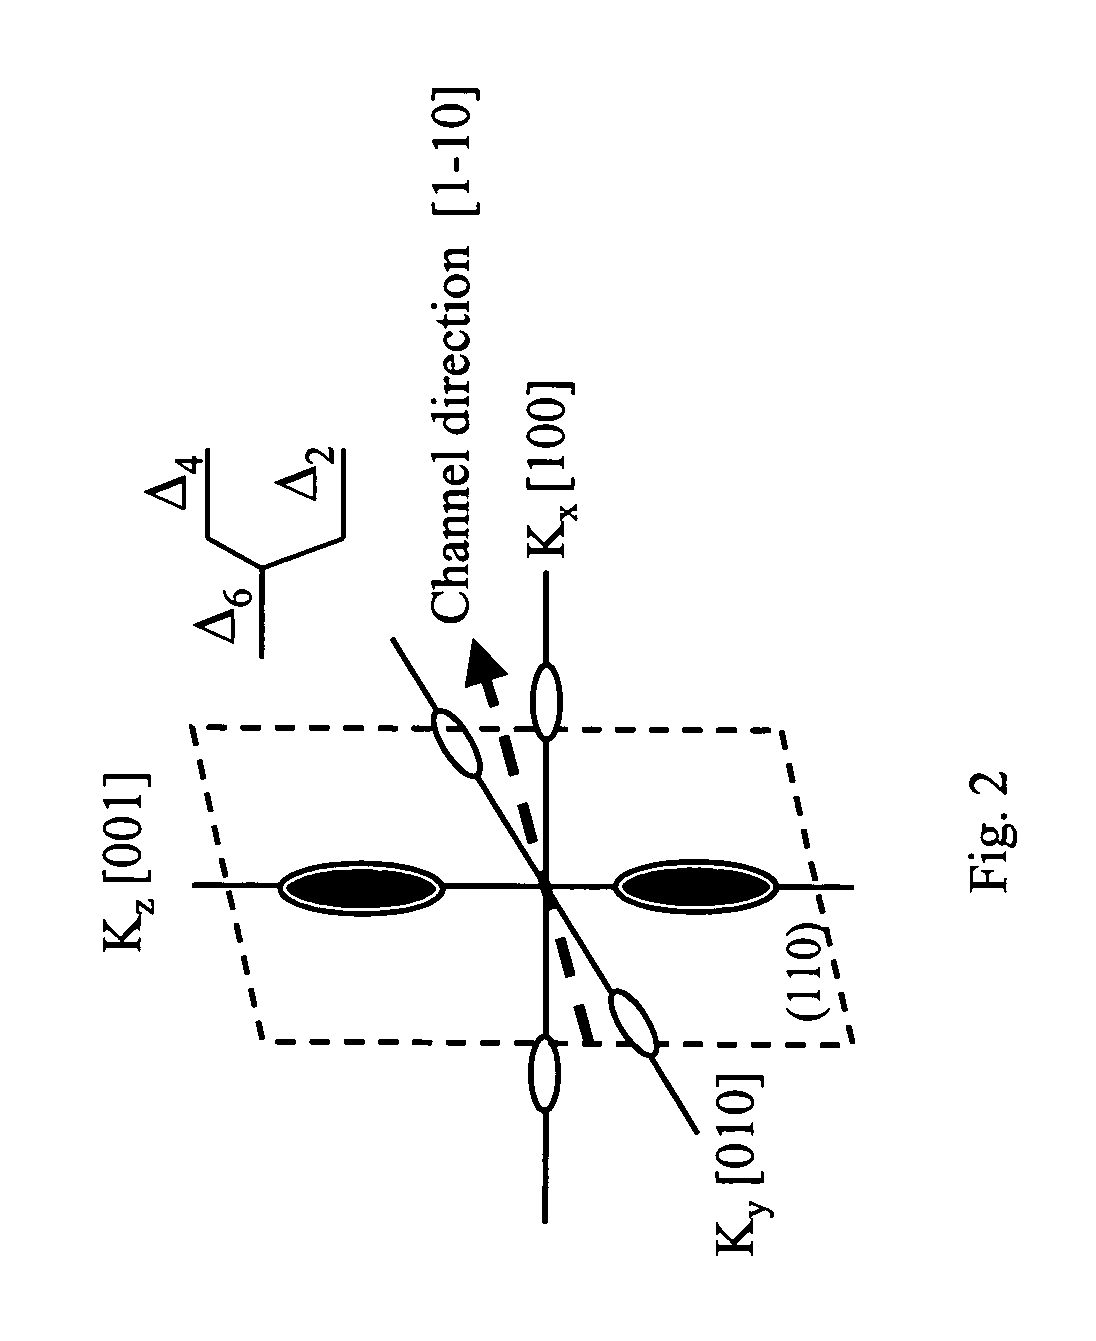 Architecture of a n-type metal-oxide-semiconductor transistor with a compressive strained silicon-germanium channel fabricated on a silicon (110) substrate